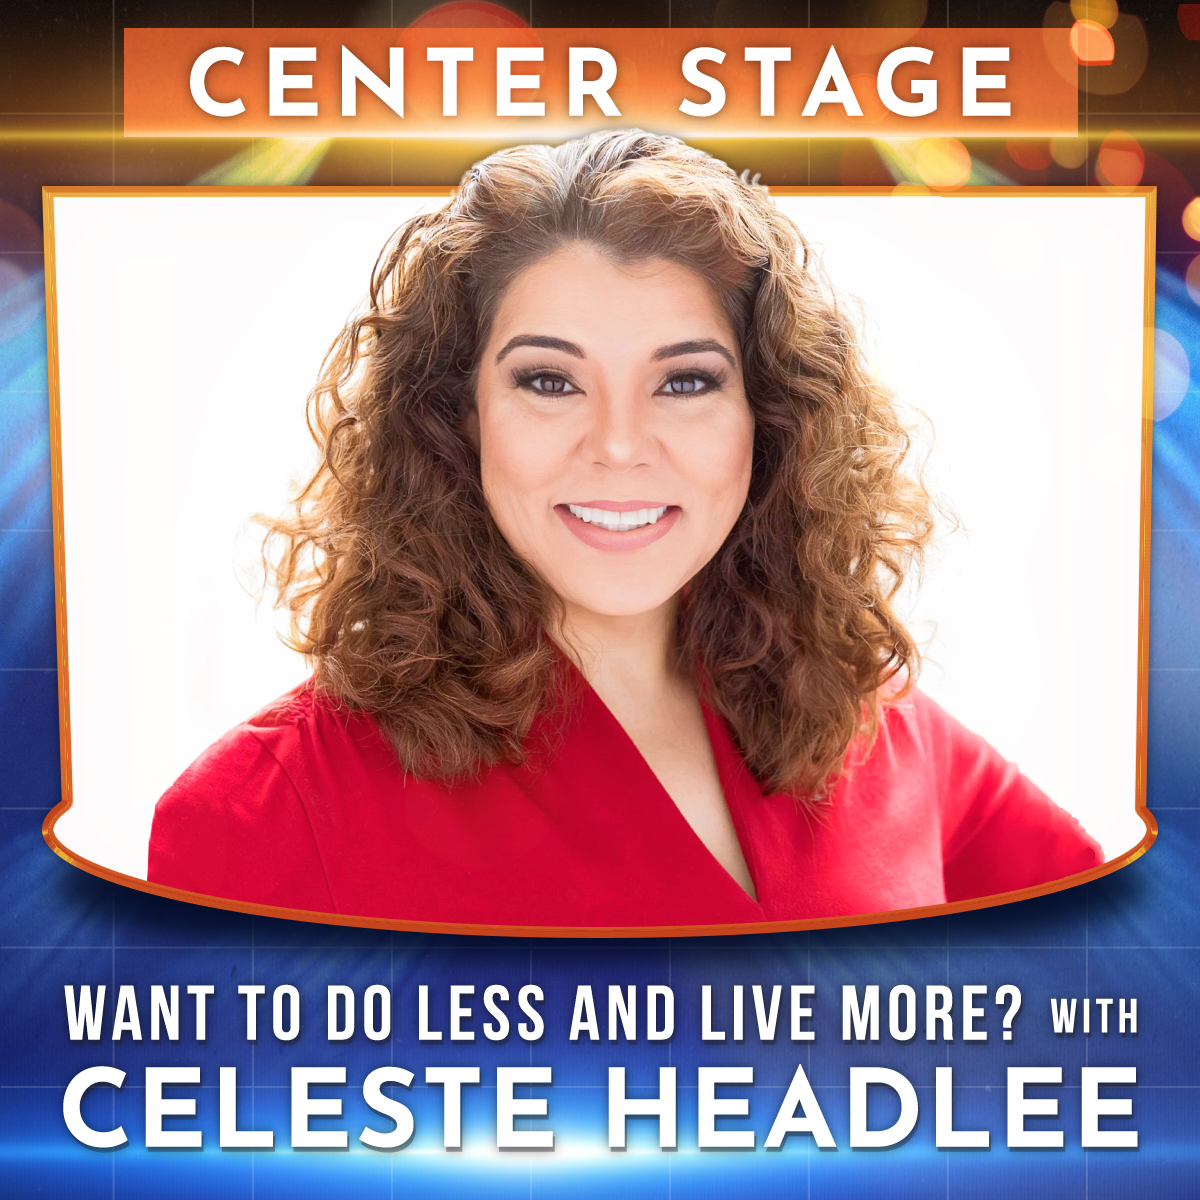 Want to Do Less and Live More? 🤩 Center Stage with Celeste Headlee